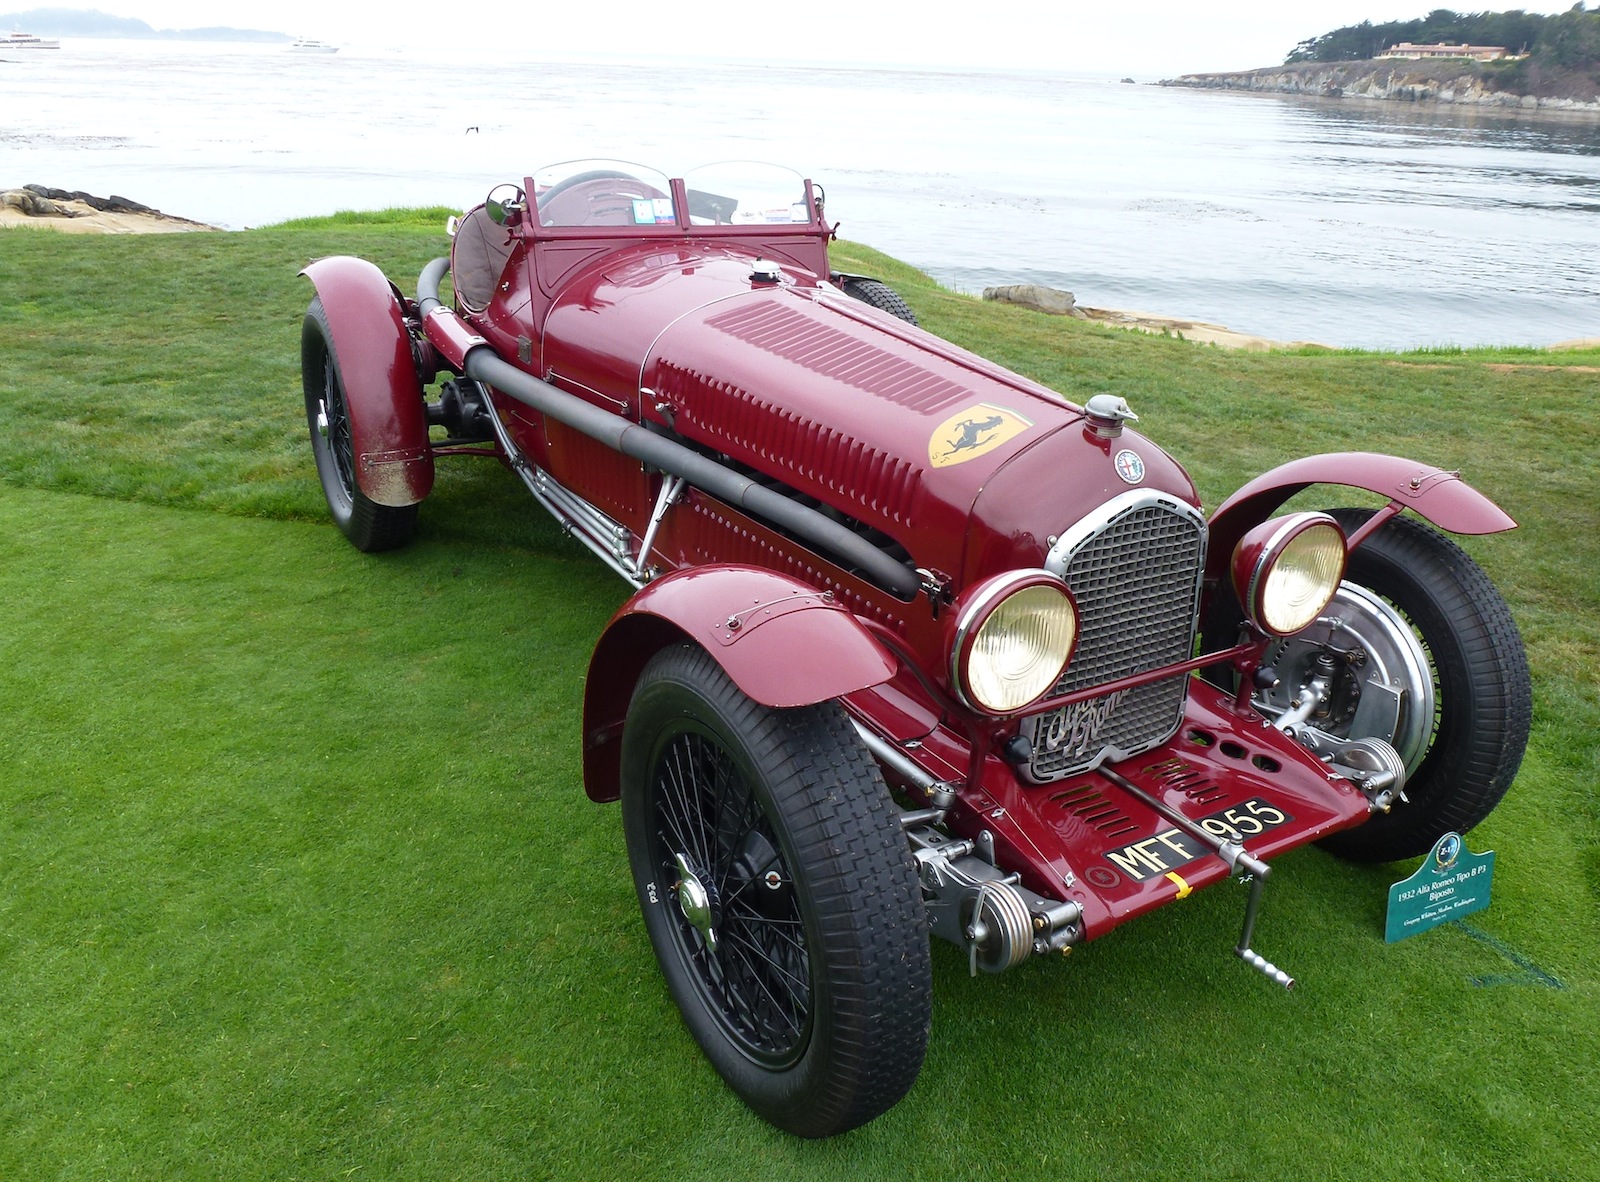 Pebble Beach Concours d’Elegance Cancelled For 2020